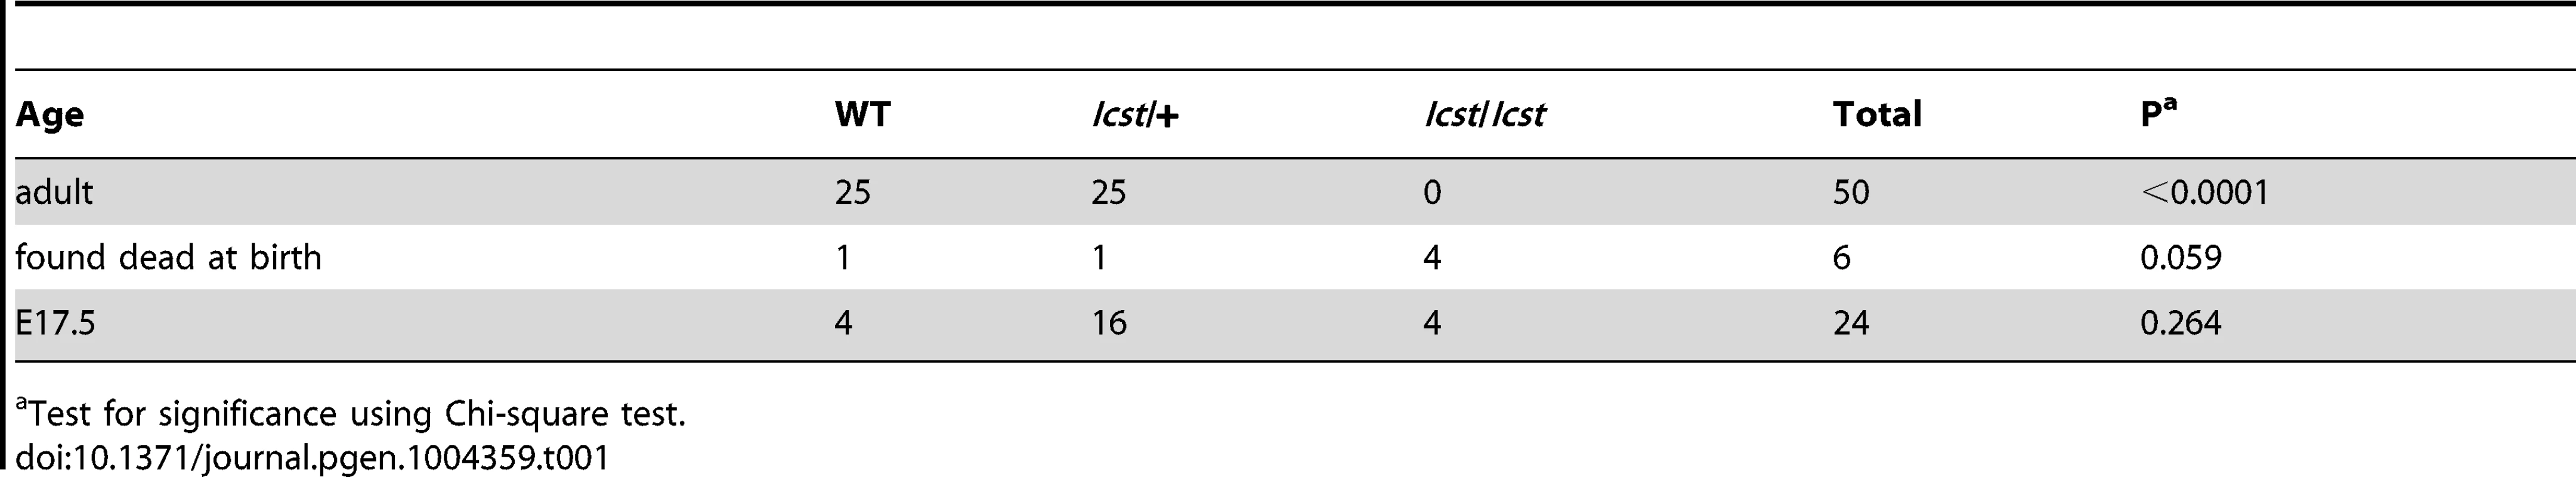 Genotyping results for <i>Lmx1b<sup>Icst/+</sup></i> intercross.